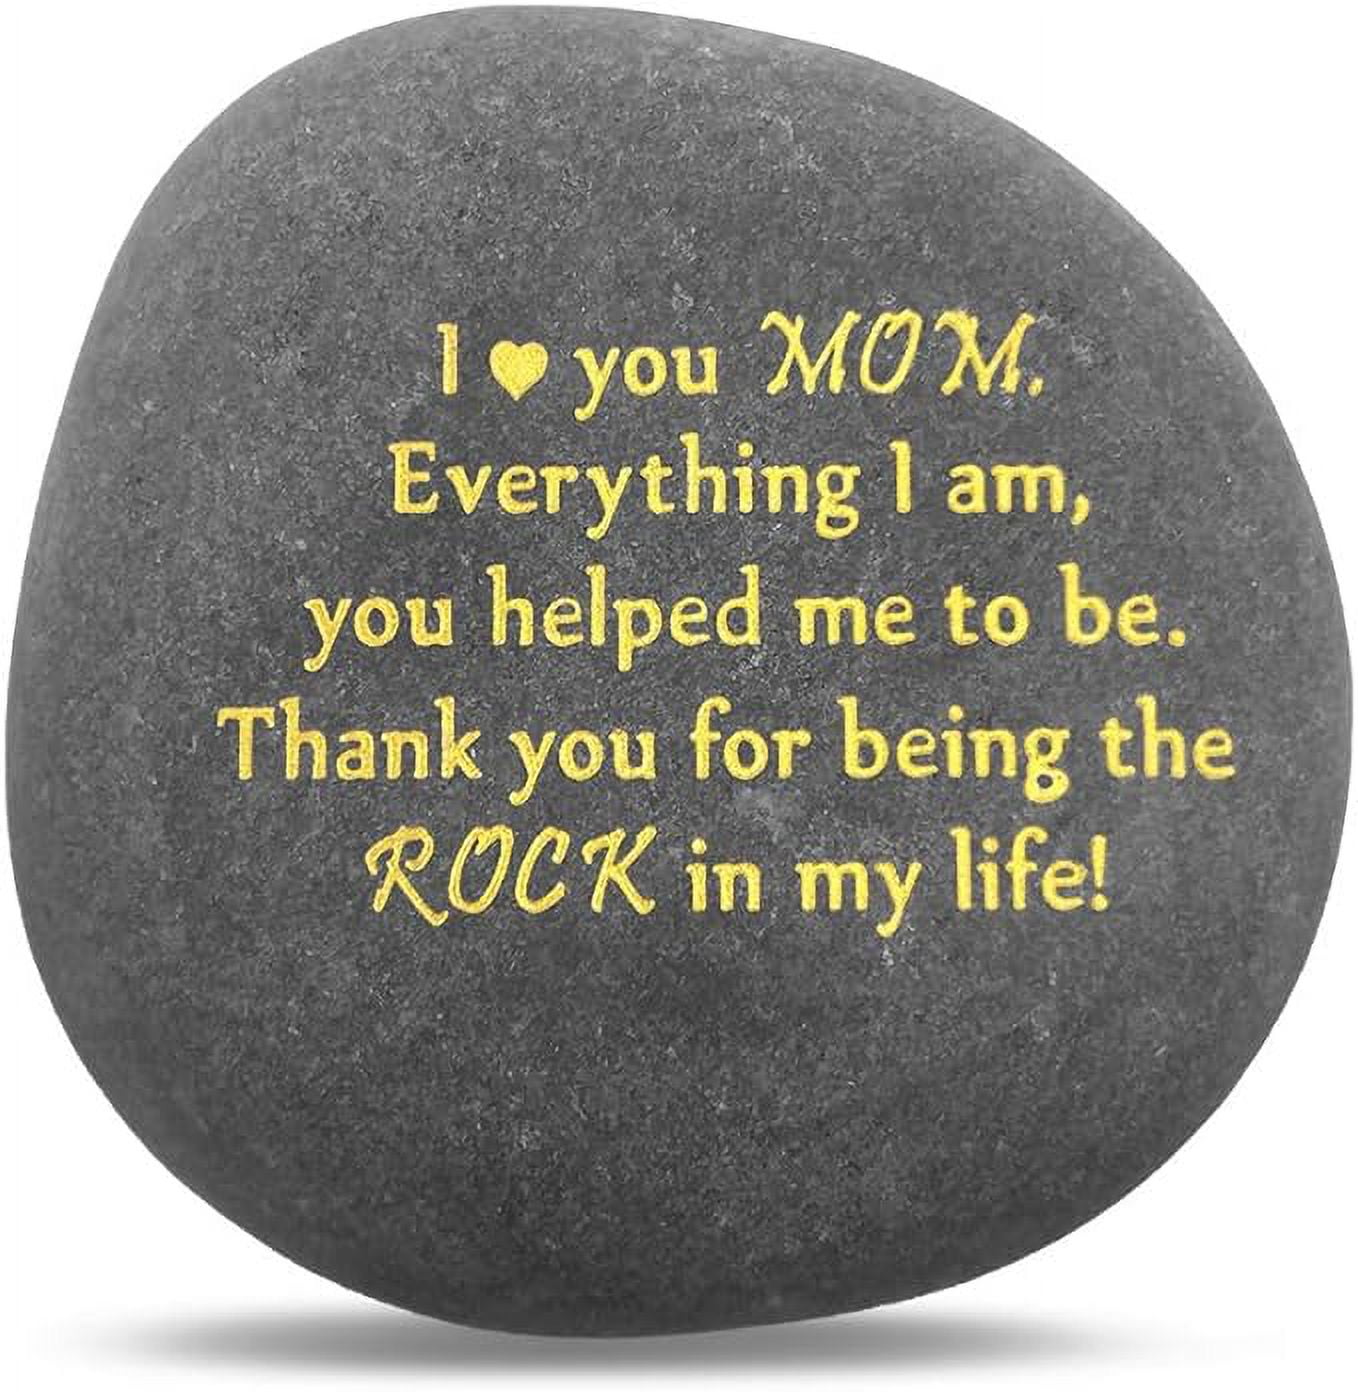 Valentines Day Gifts for Mom, Gifts for Mom, Birthday Gifts for Mom from  Daughter or Son, Mom Birthday Gifts, Engraved Rock, Unique Gifts Idea and